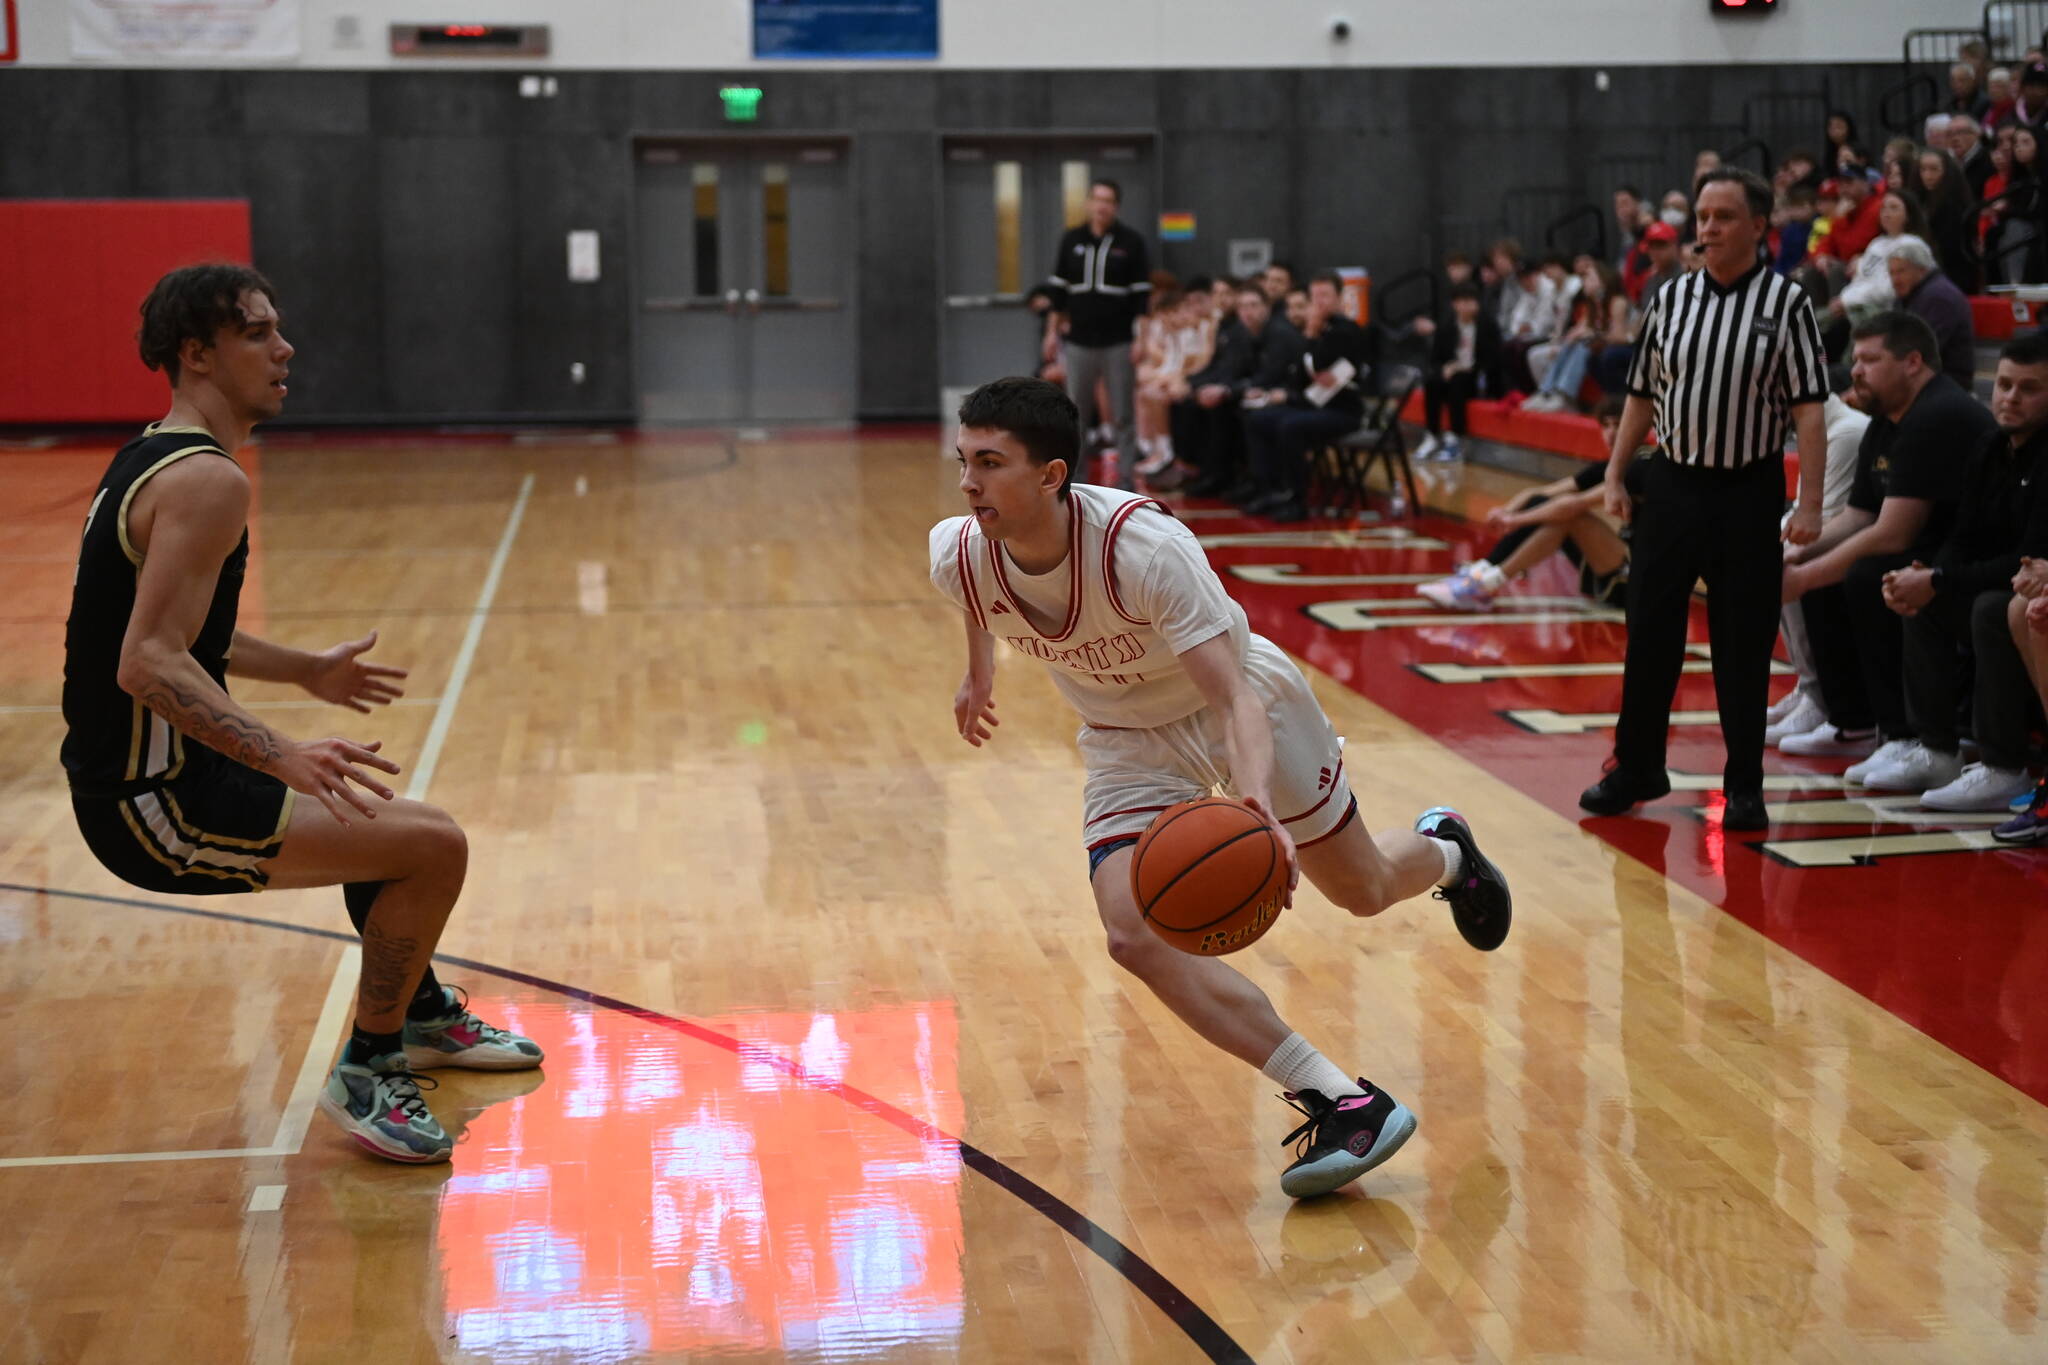 Jake Bonnofsky dribbles around a defender in the Wildcats victory over Lake Stevens. Photo Courtesy of Calder Productions.